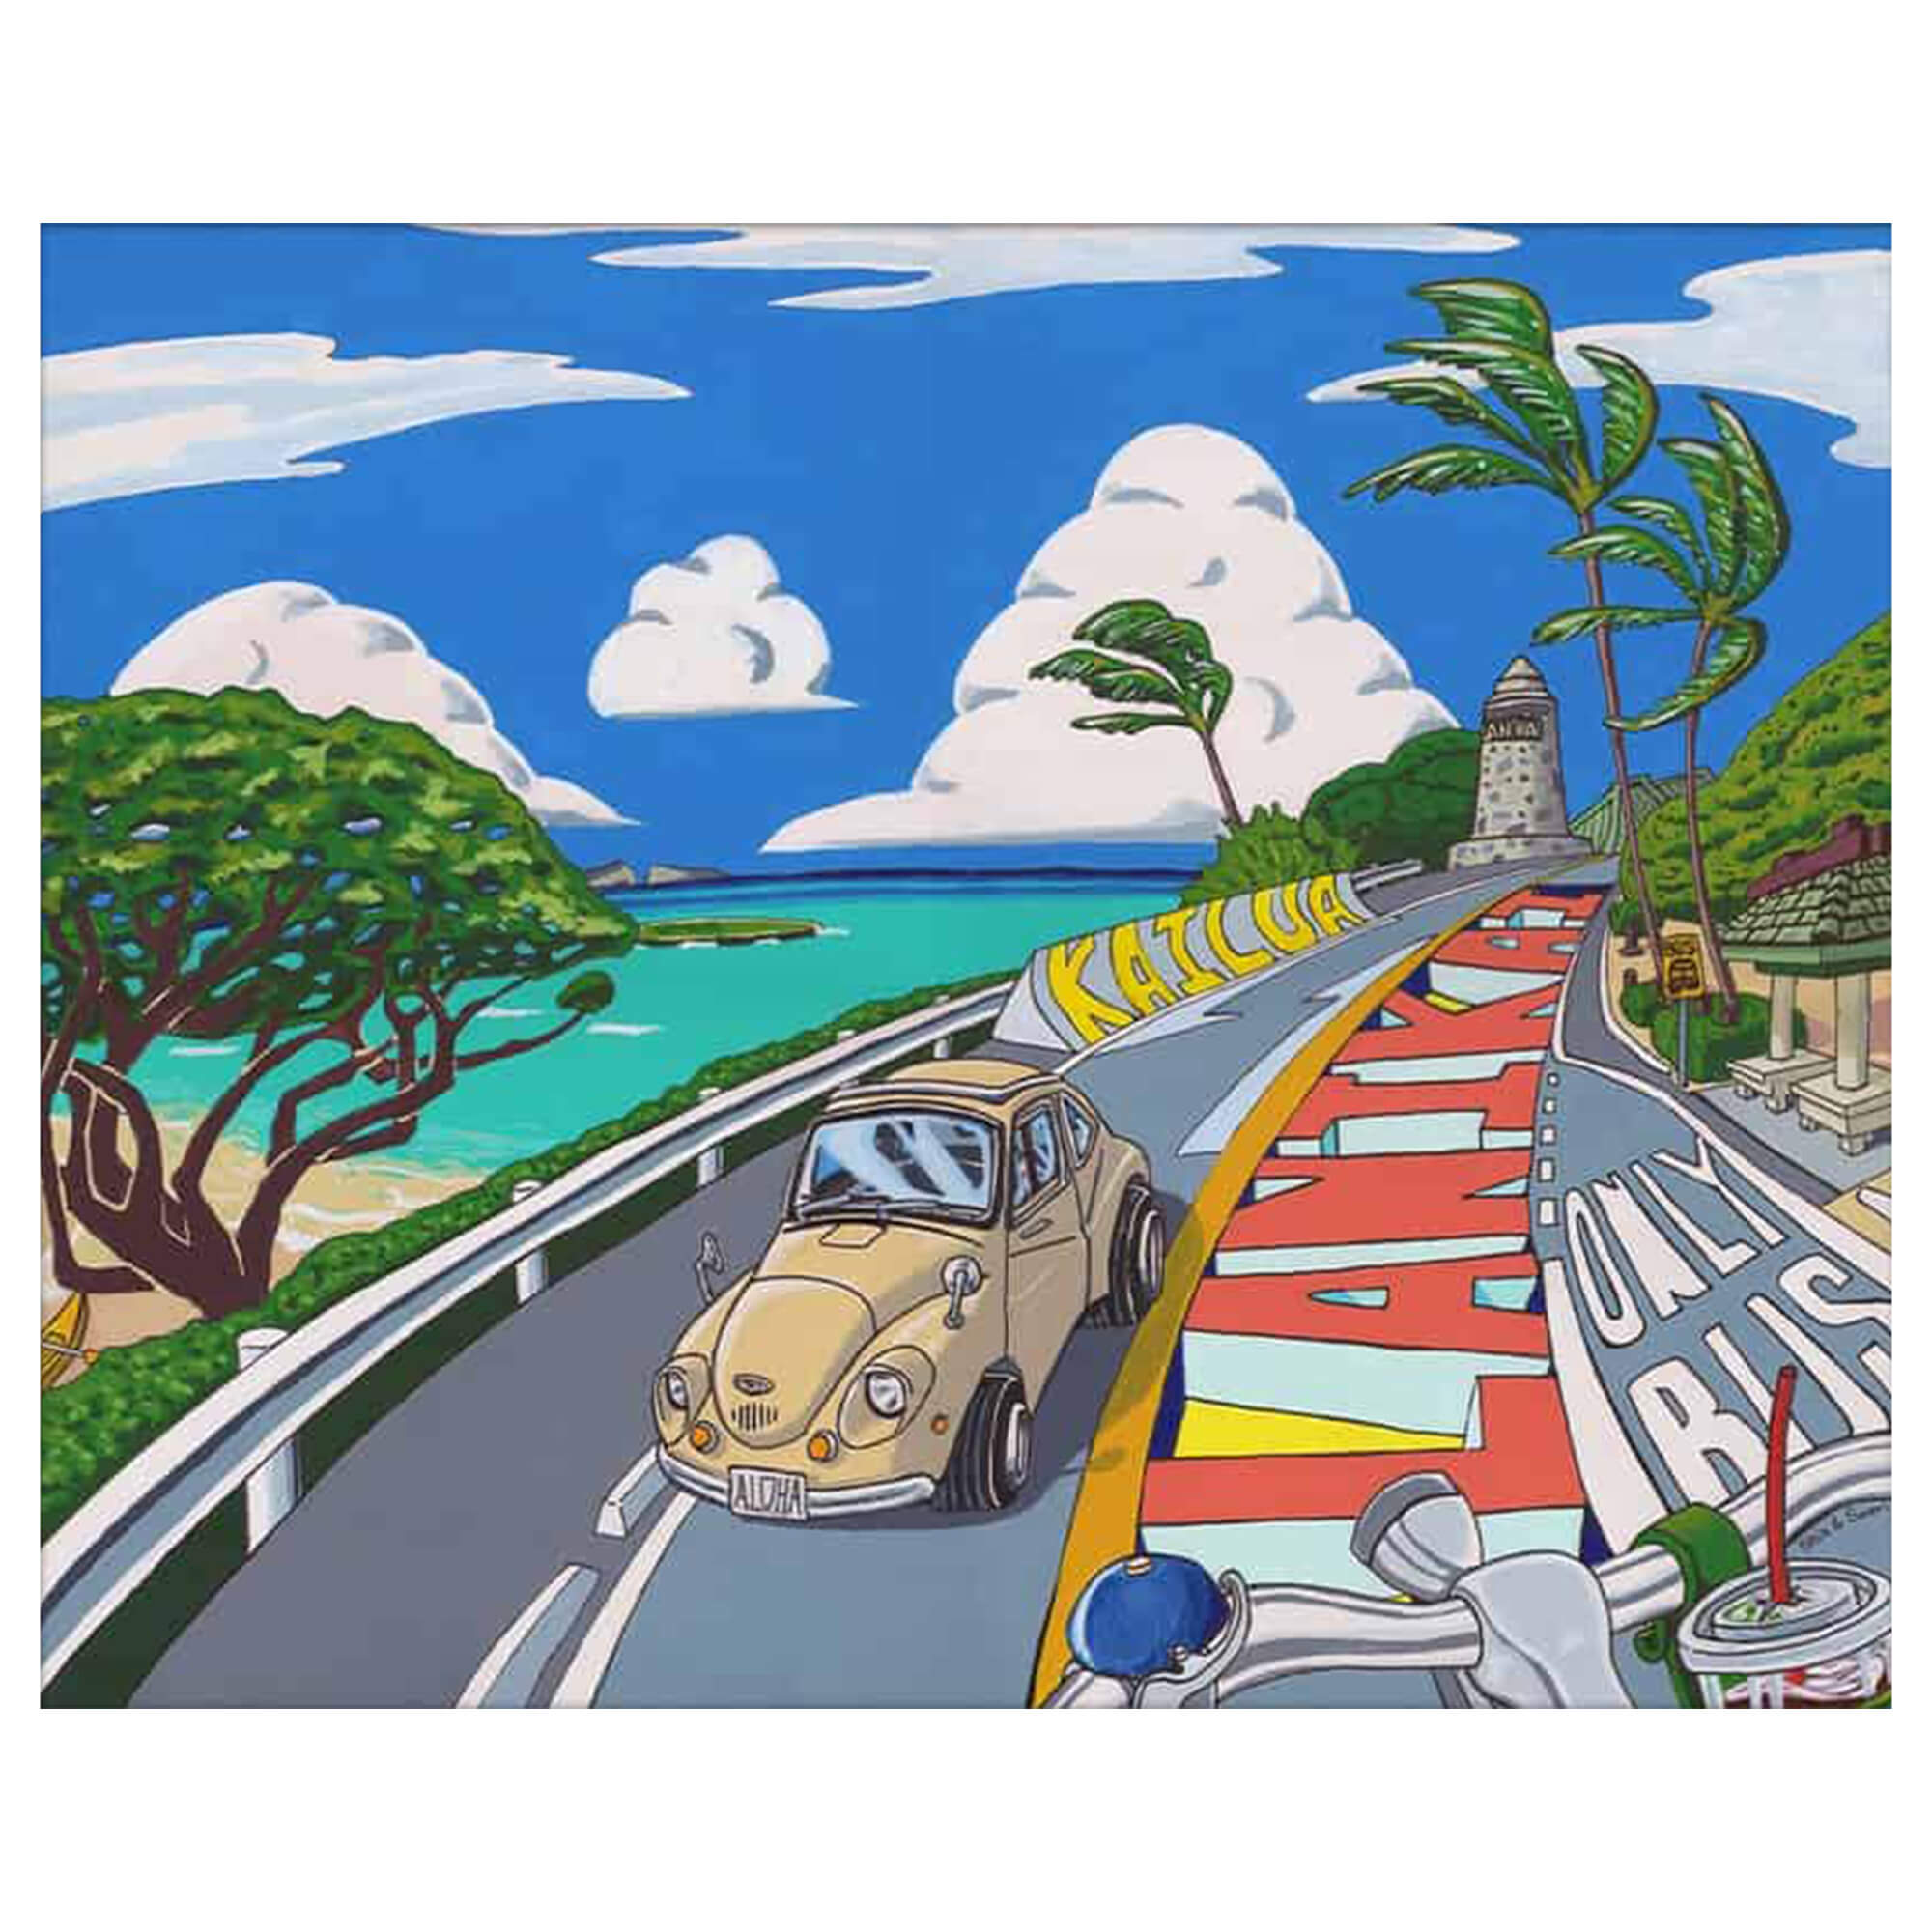 A matted art print of a cyclist's view of the infamous Lanikai Beach in Hawaii by Hawaii artist Shin Kato